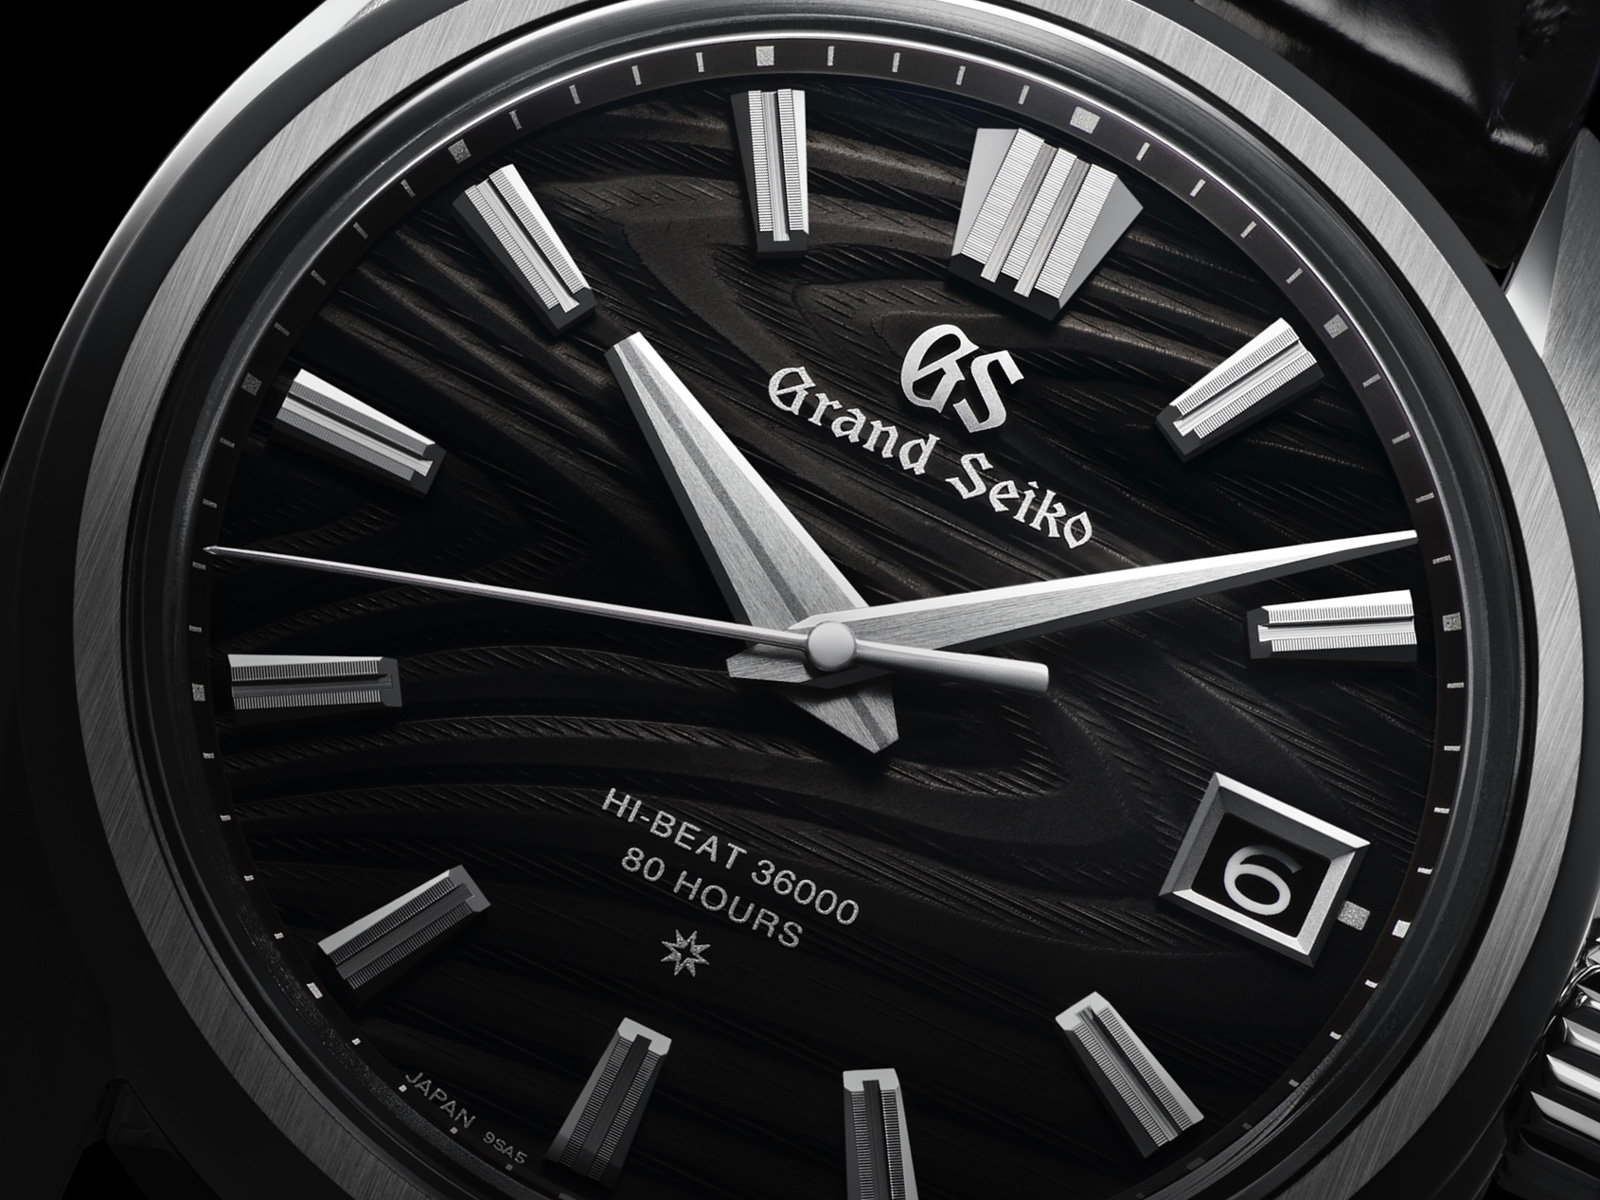 Grand Seiko Introduces the Heritage SLGH007 in Platinum | SJX Watches